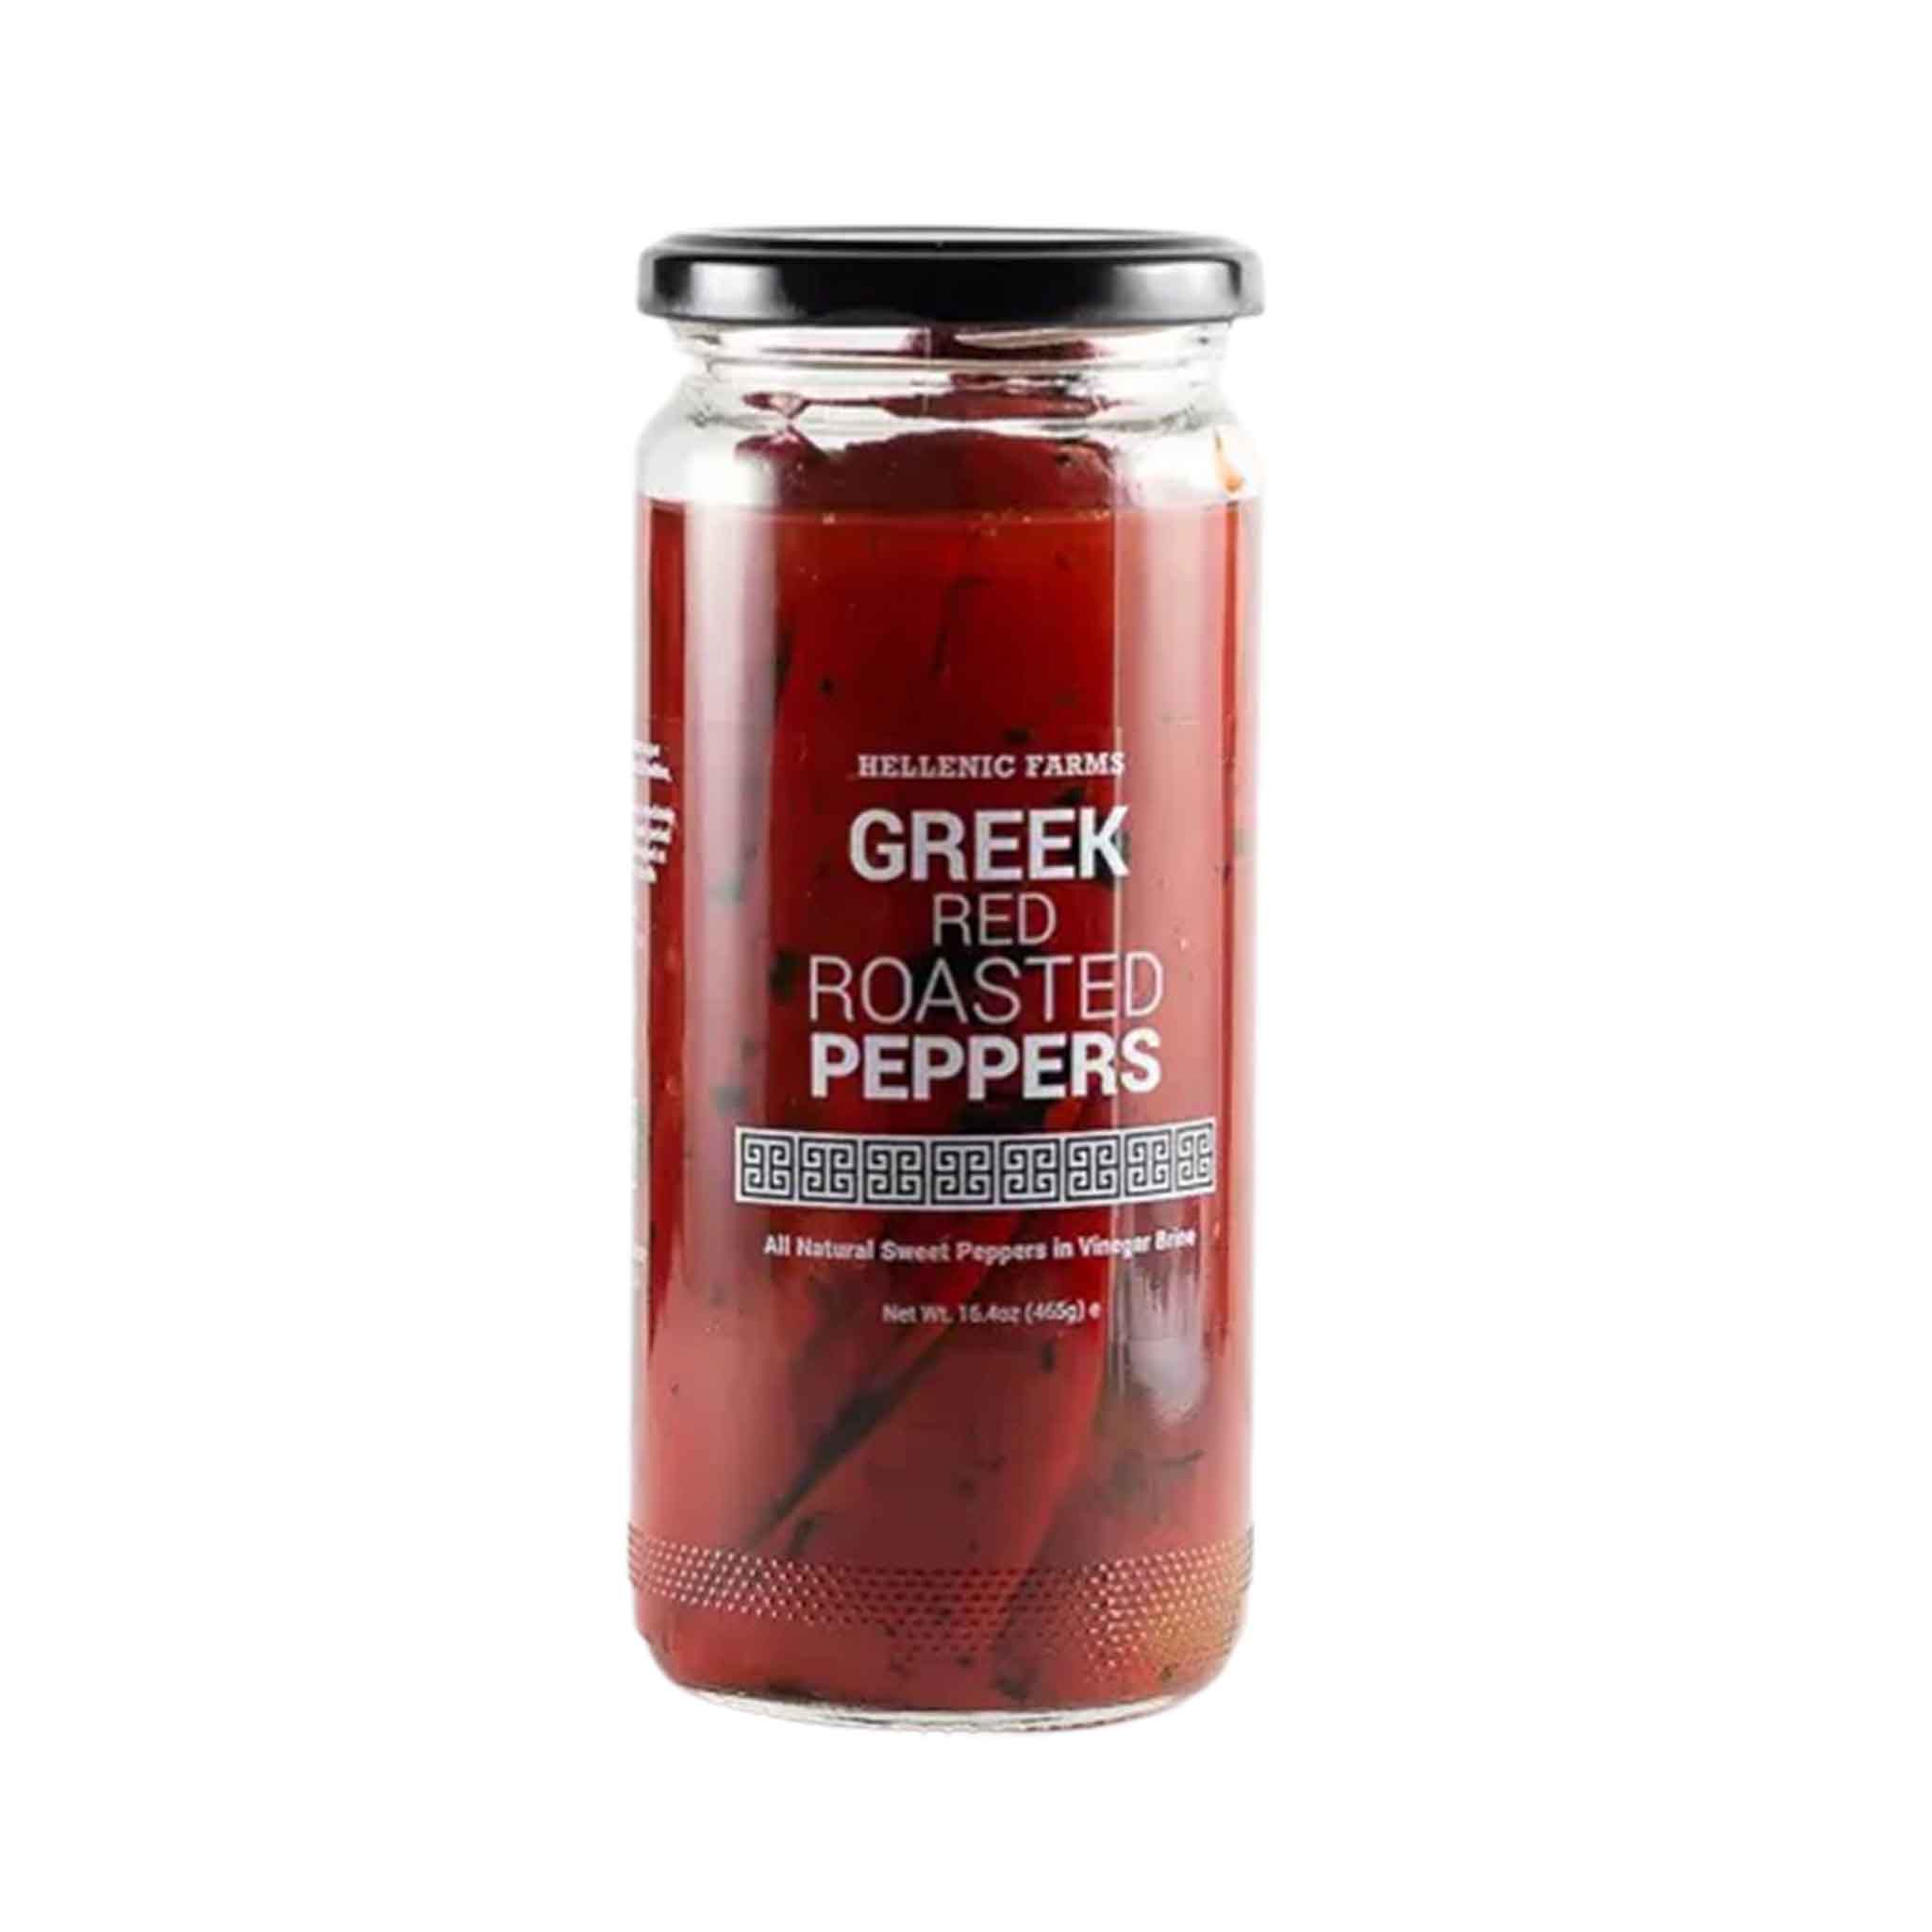 HELLENIC FARMS ROASTED RED PEPPERS 16.4oz